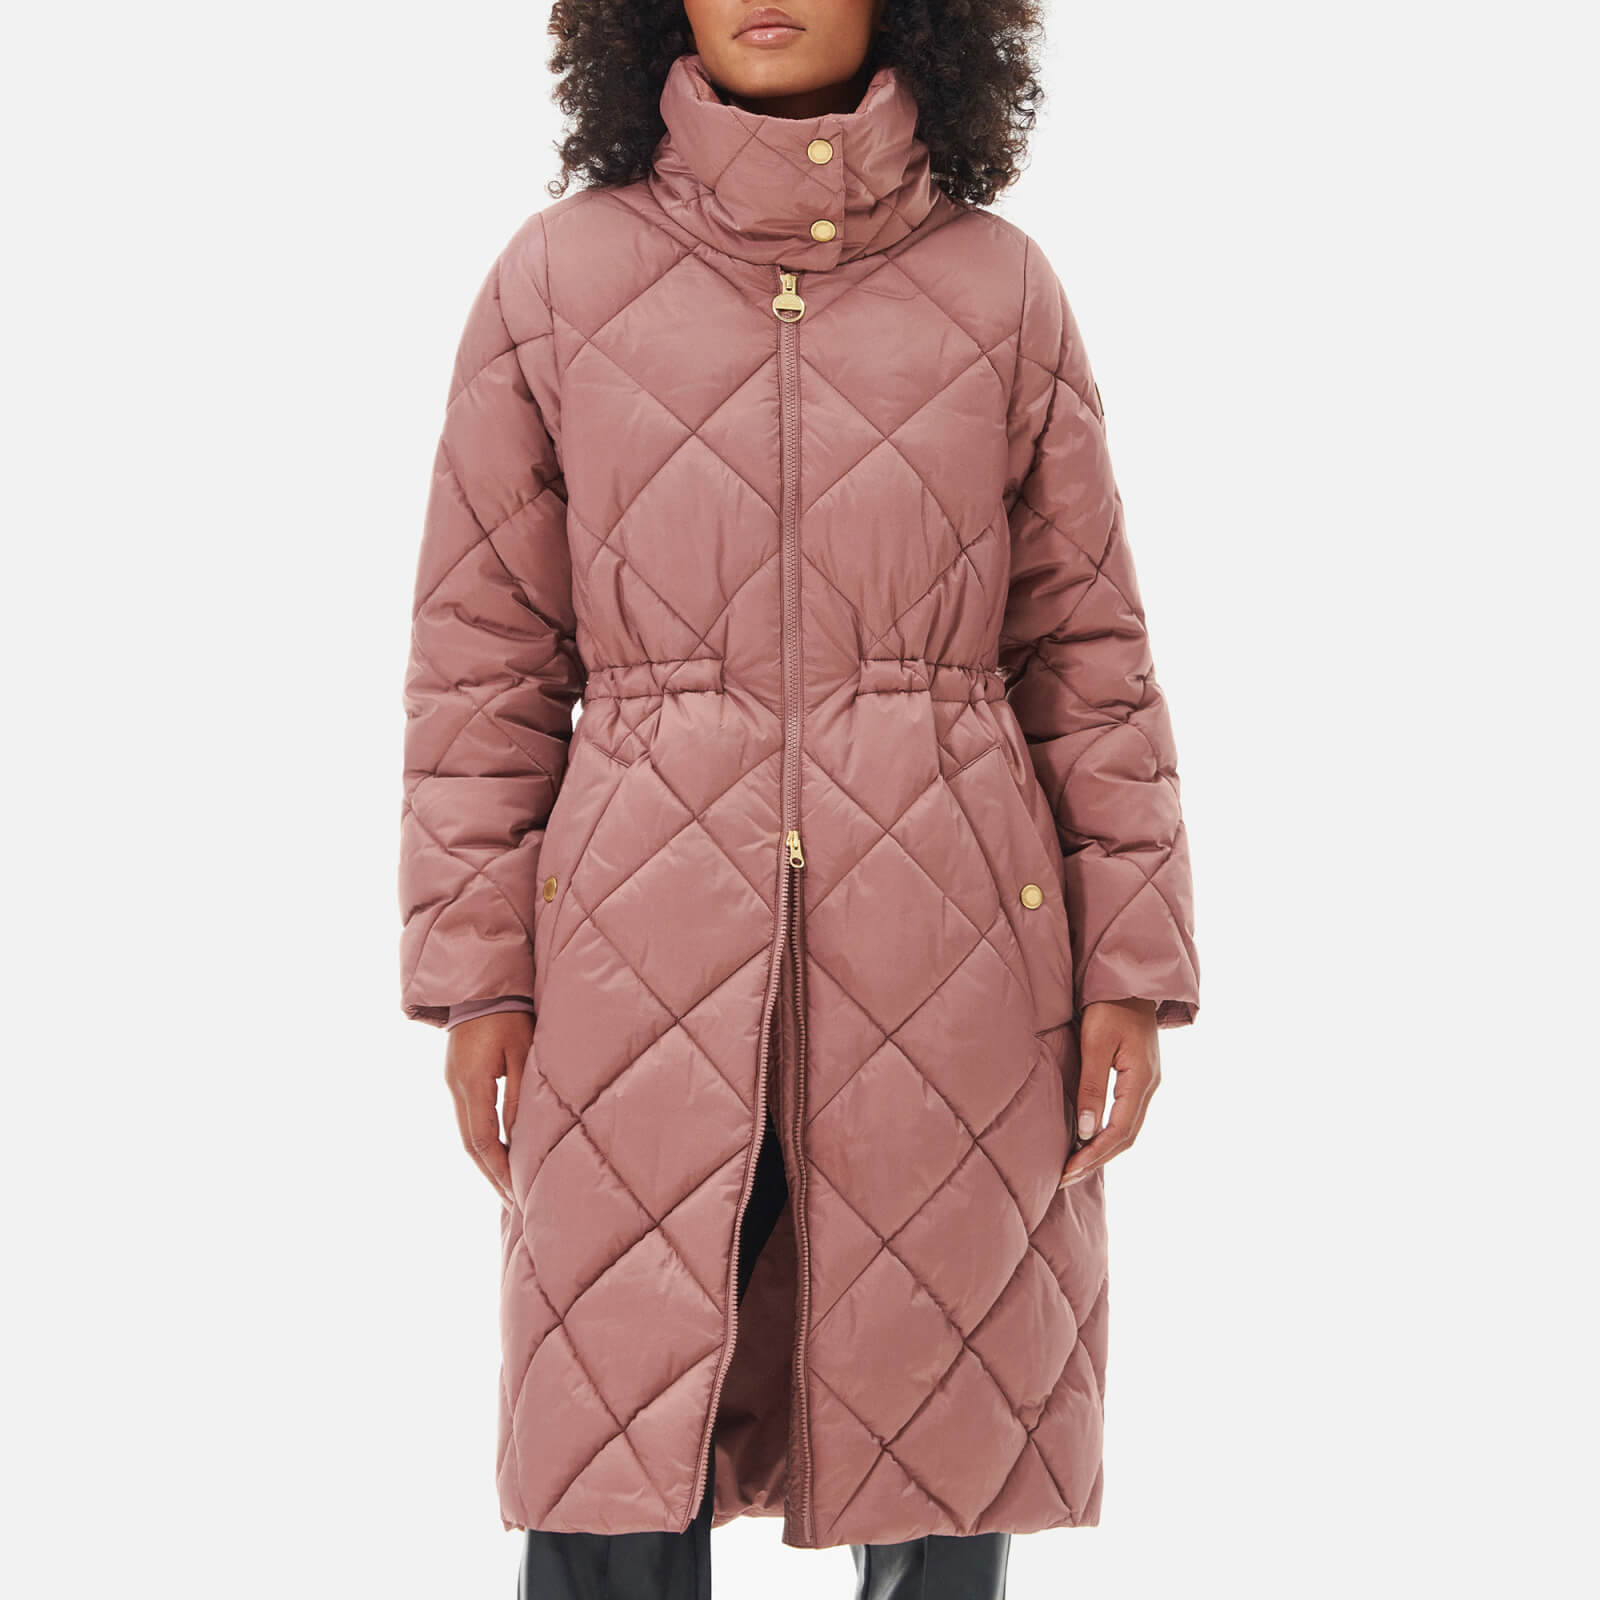 Barbour International Enfield Quilted Shell Coat